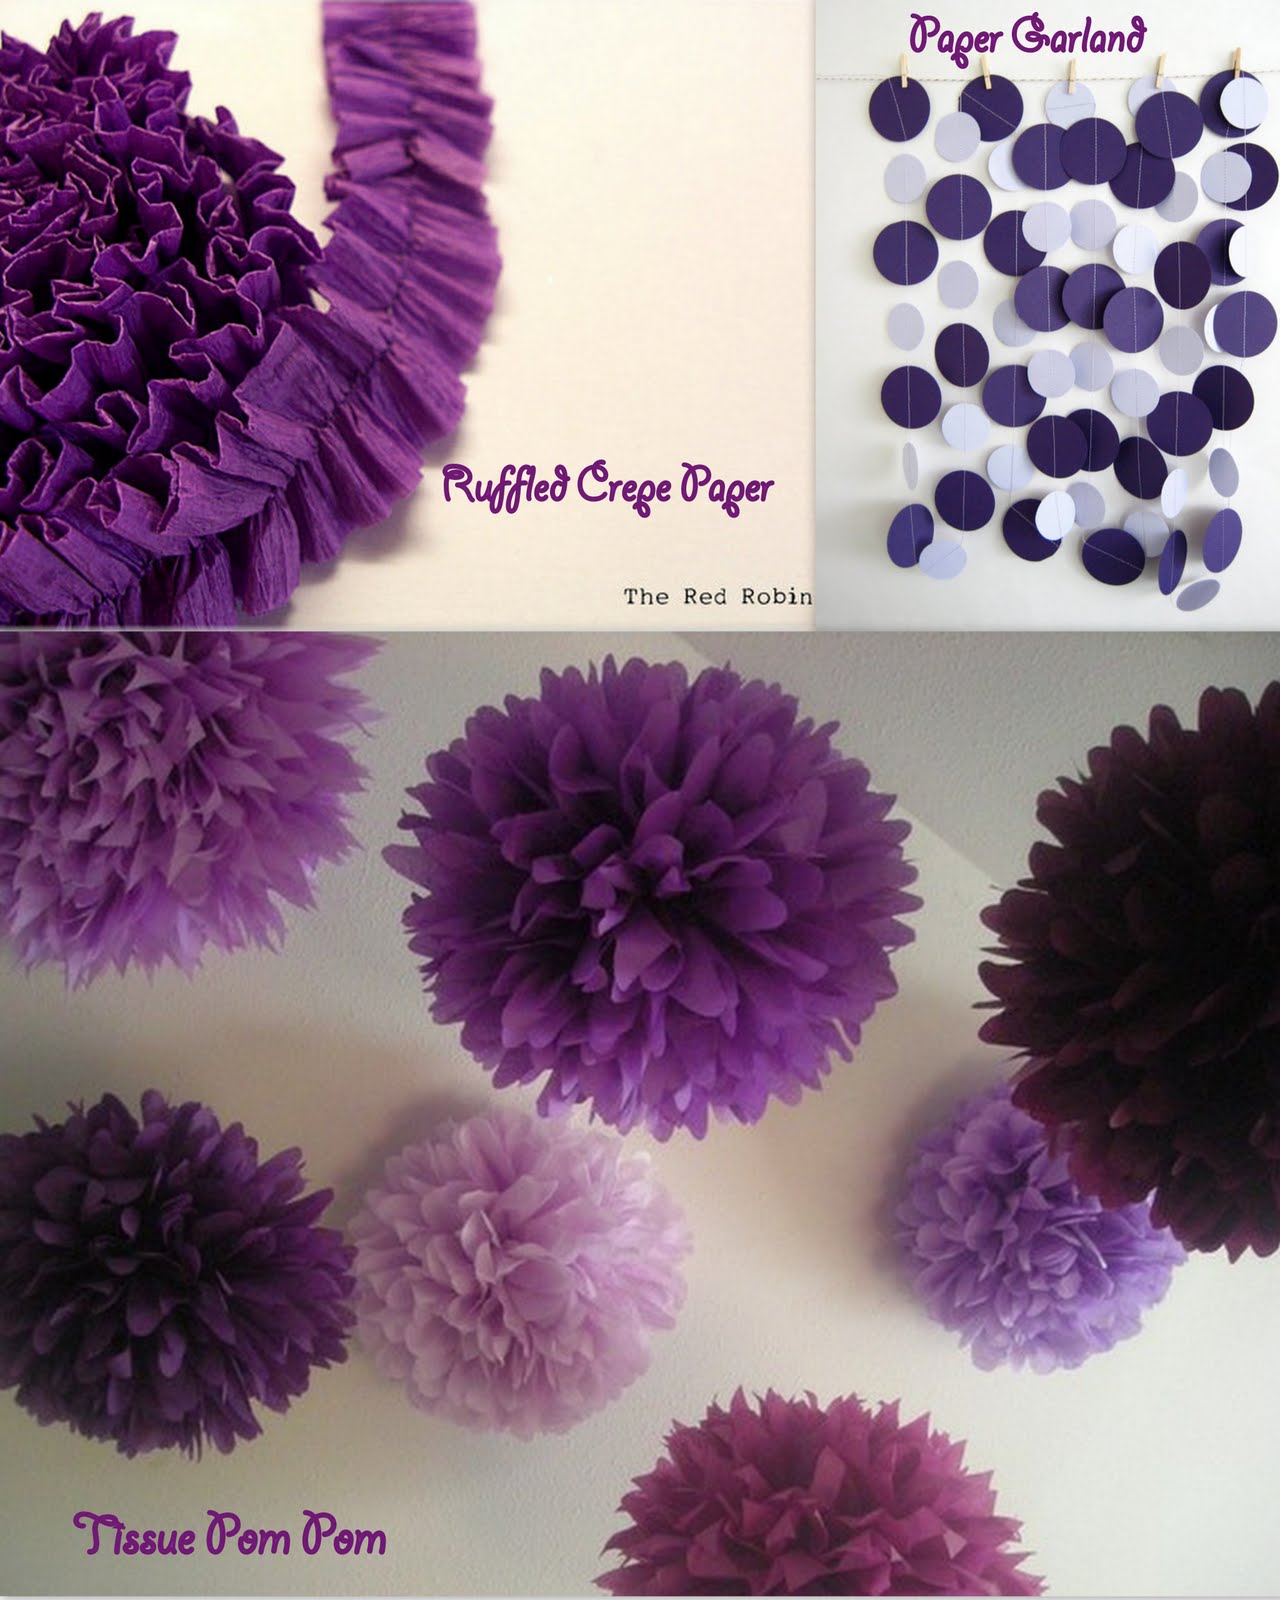 cake pops decorating ideas Ruffled Crepe paper from TheRedRobin .